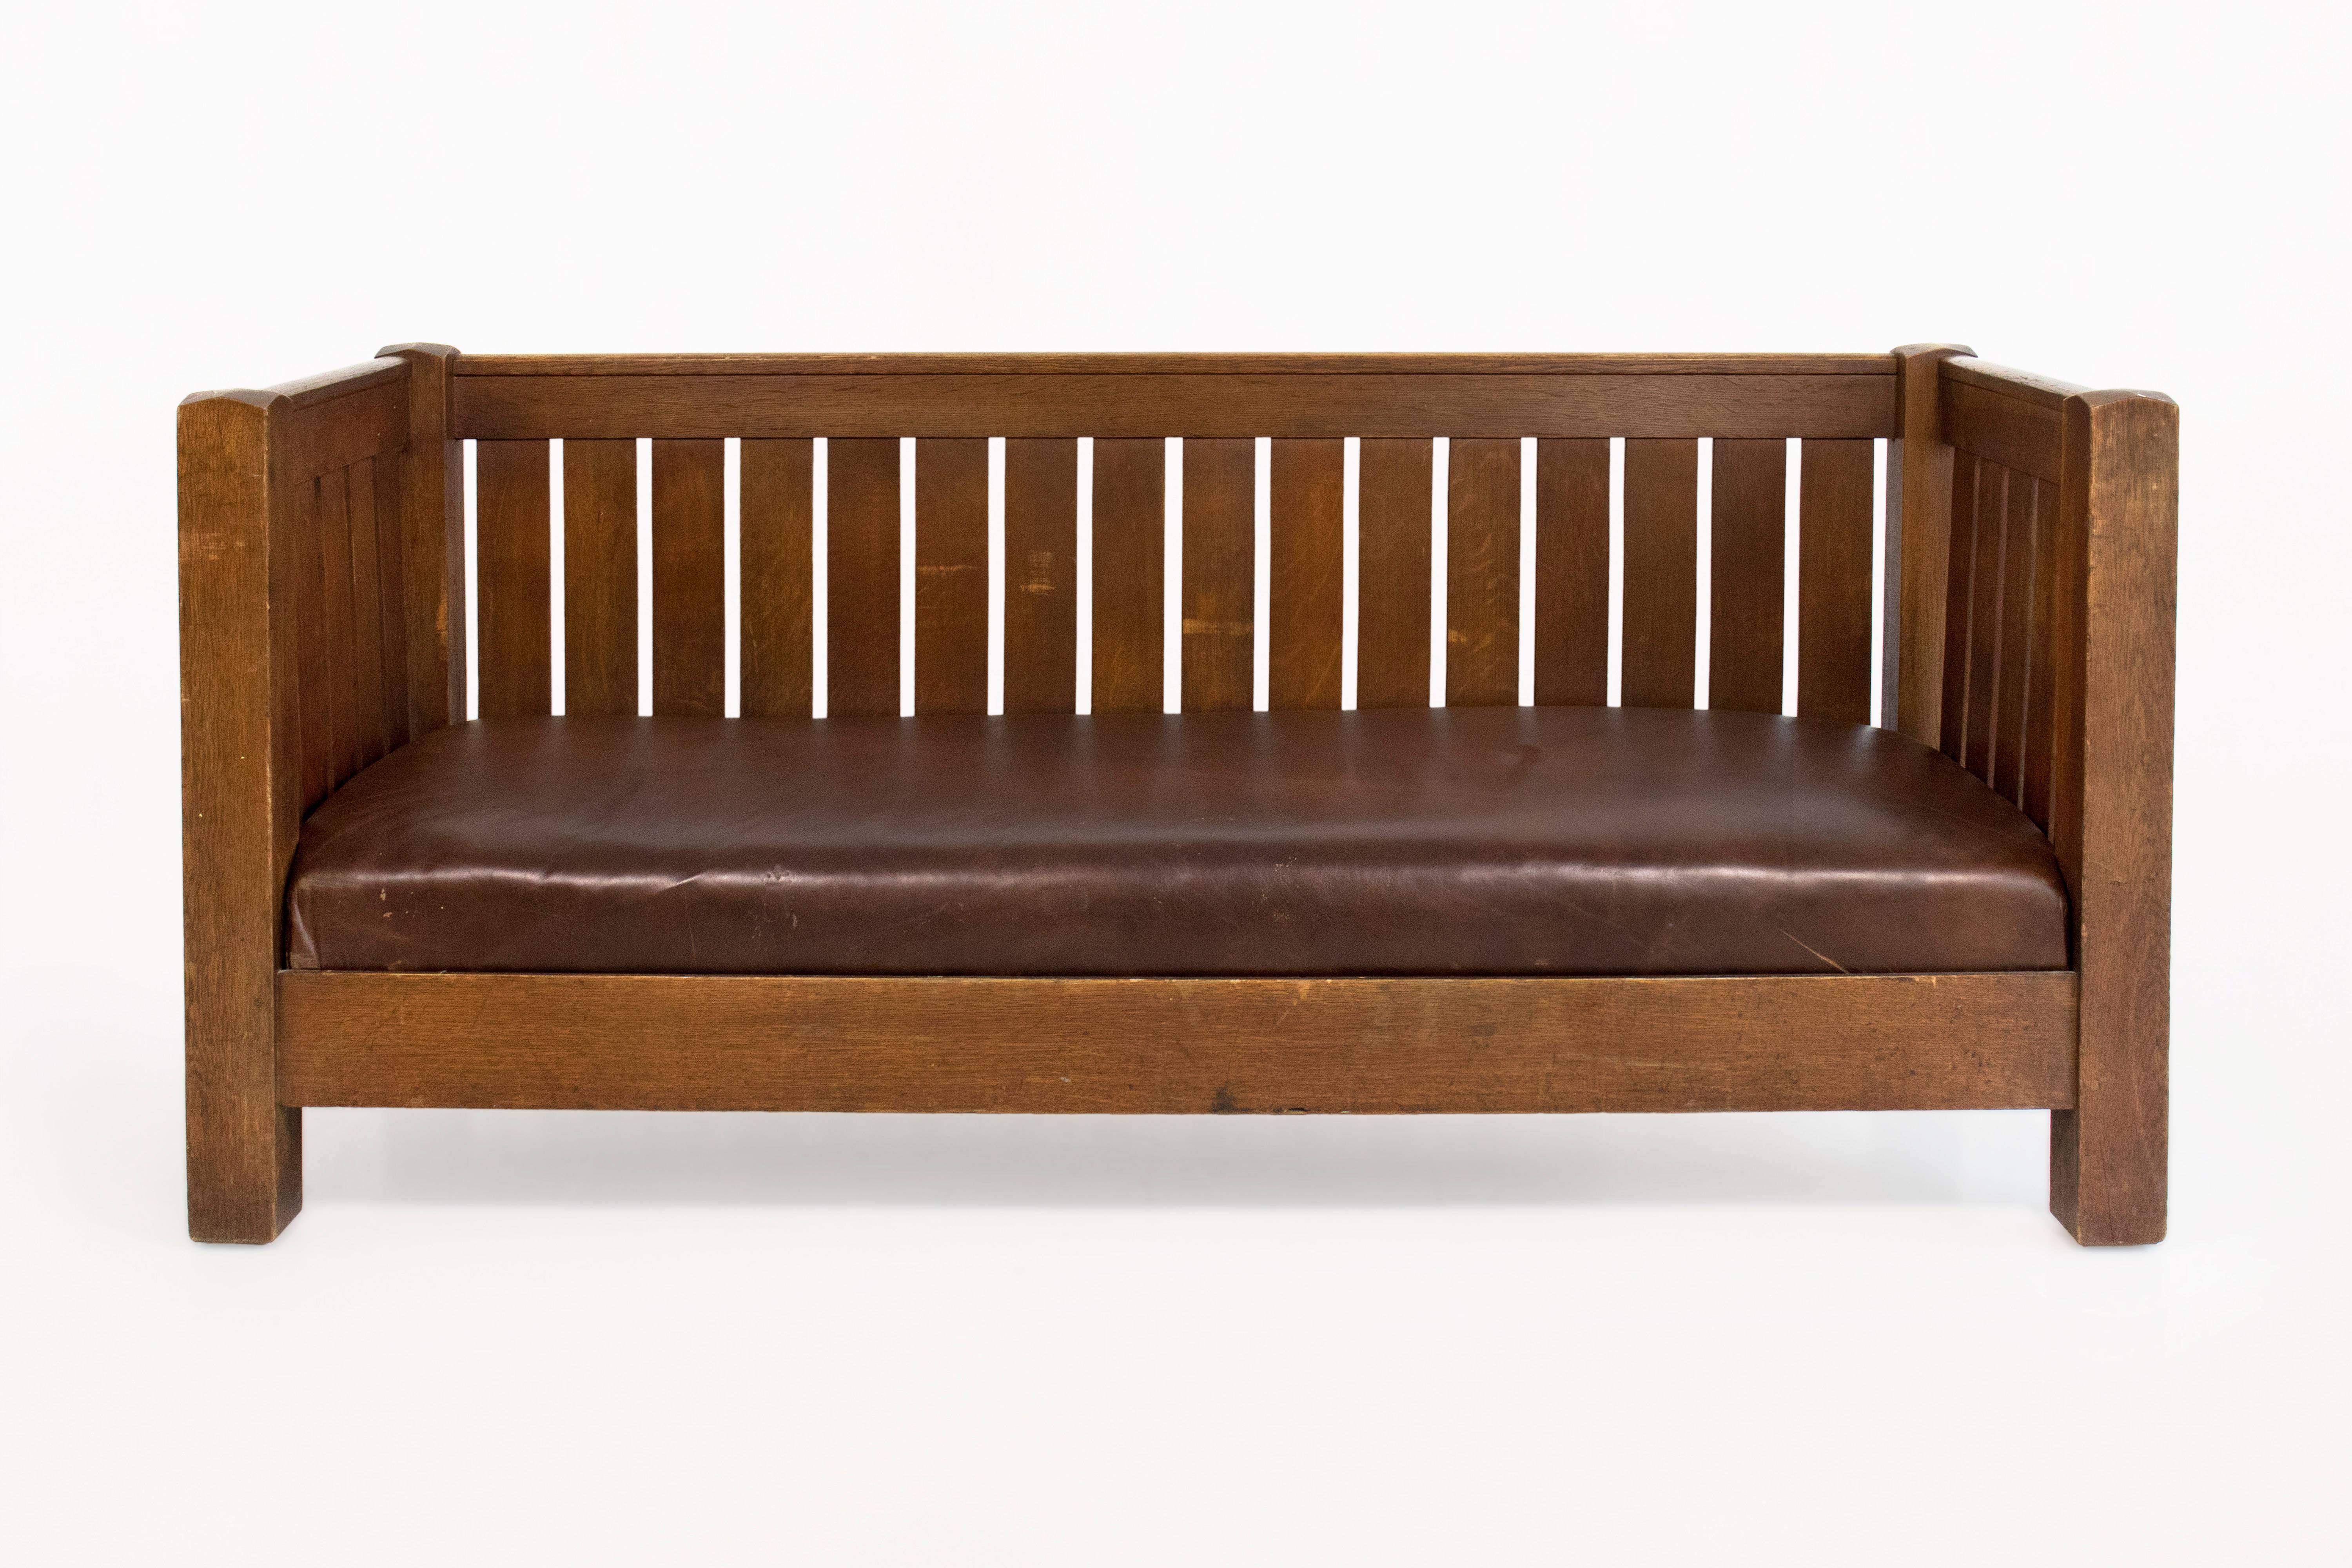 Large and rare mission oak sofa bench by Gustav Stickley
Rare and absolutely stunning form
circa 1910, USA
Very good vintage condition.